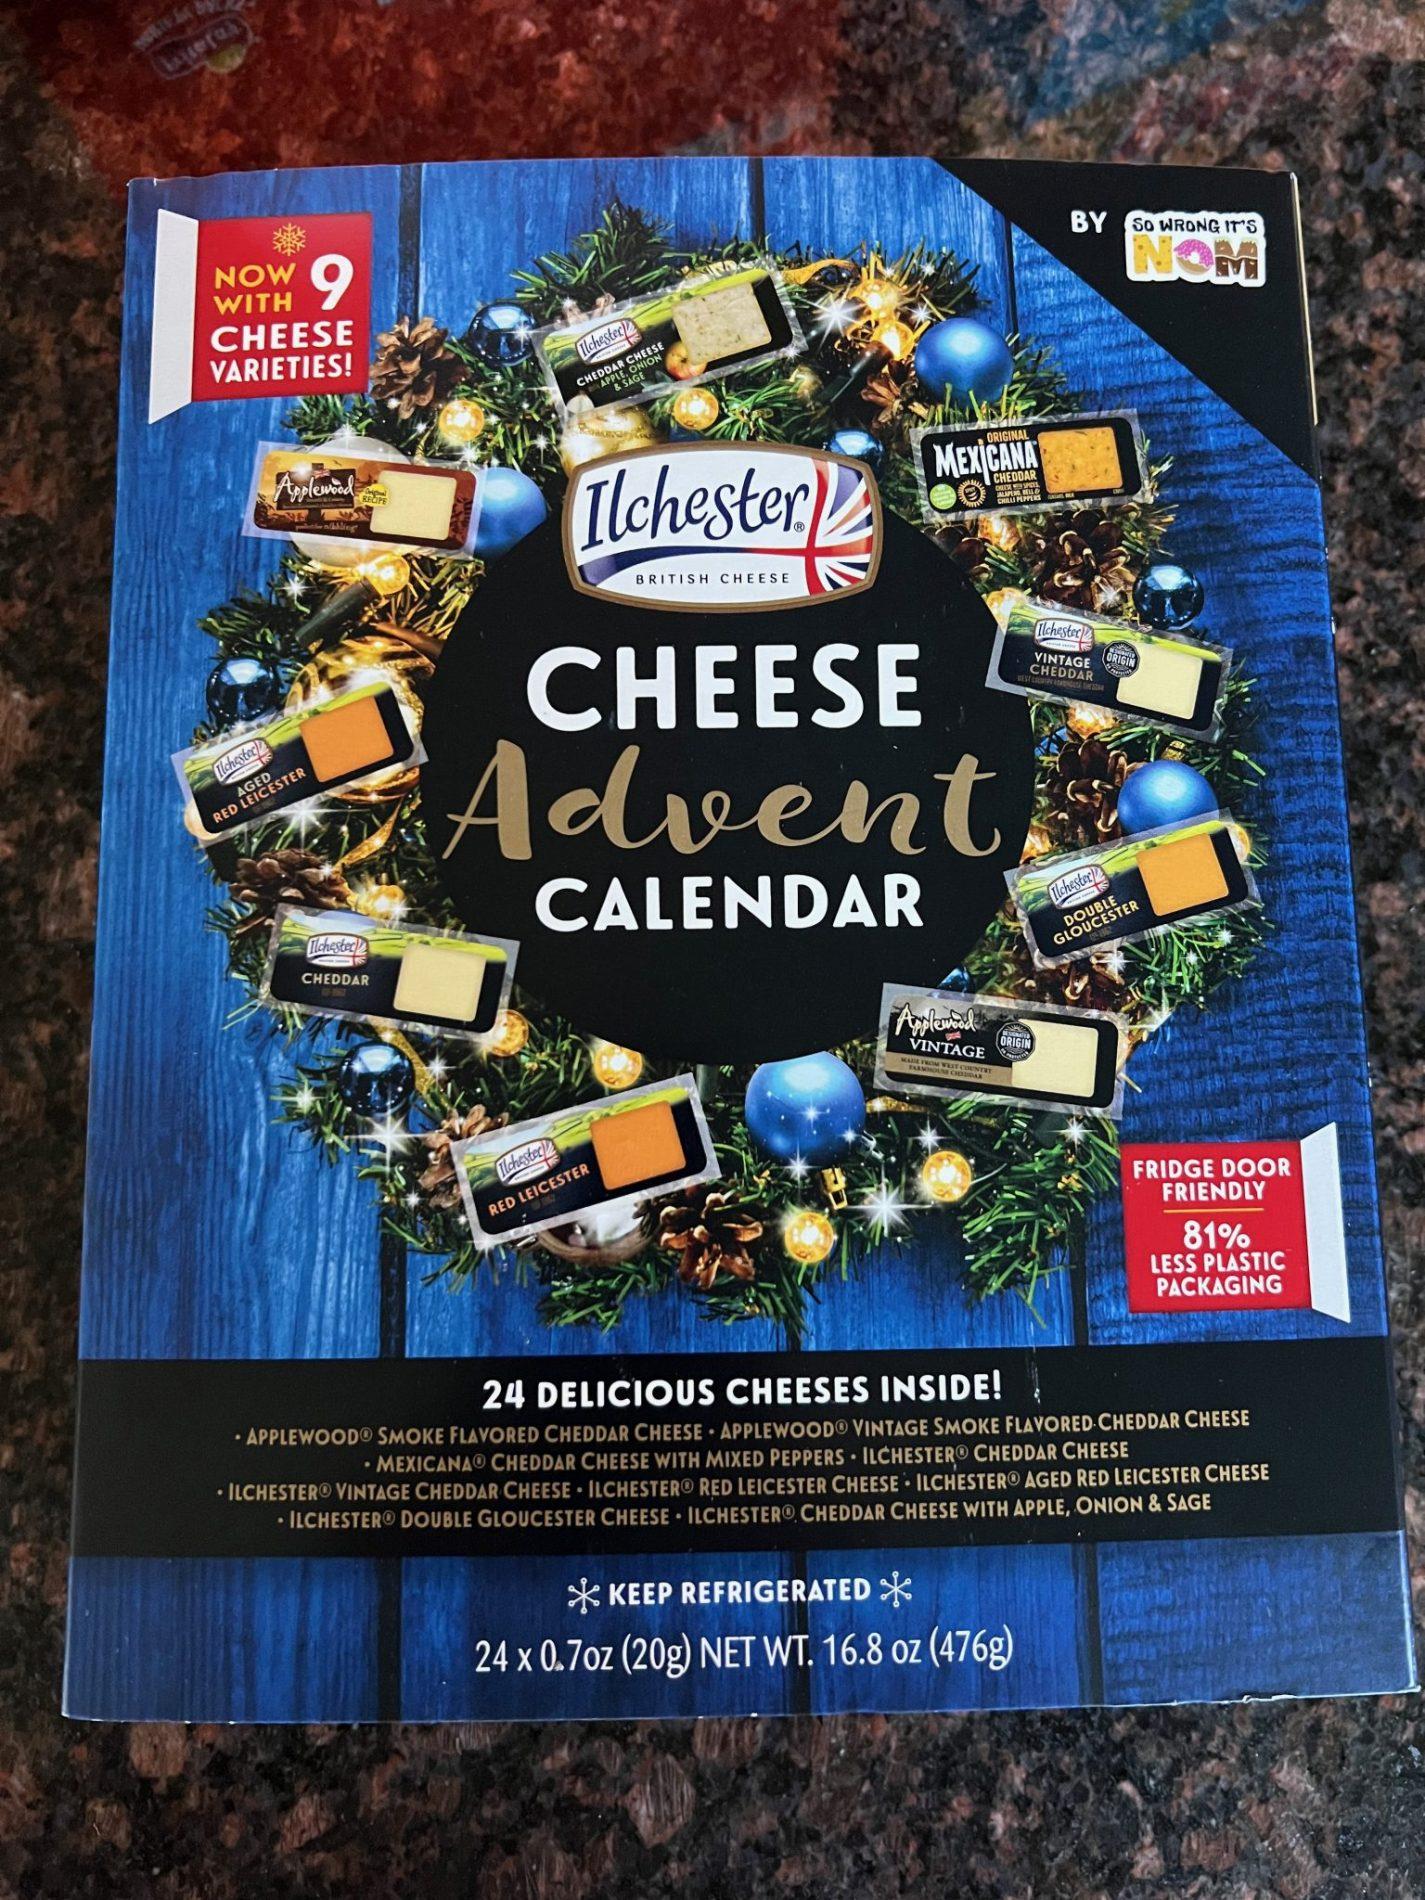 Read more about the article So Wrong It’s Nom 2022 Ilchester Cheese Advent Calendar – Now Available